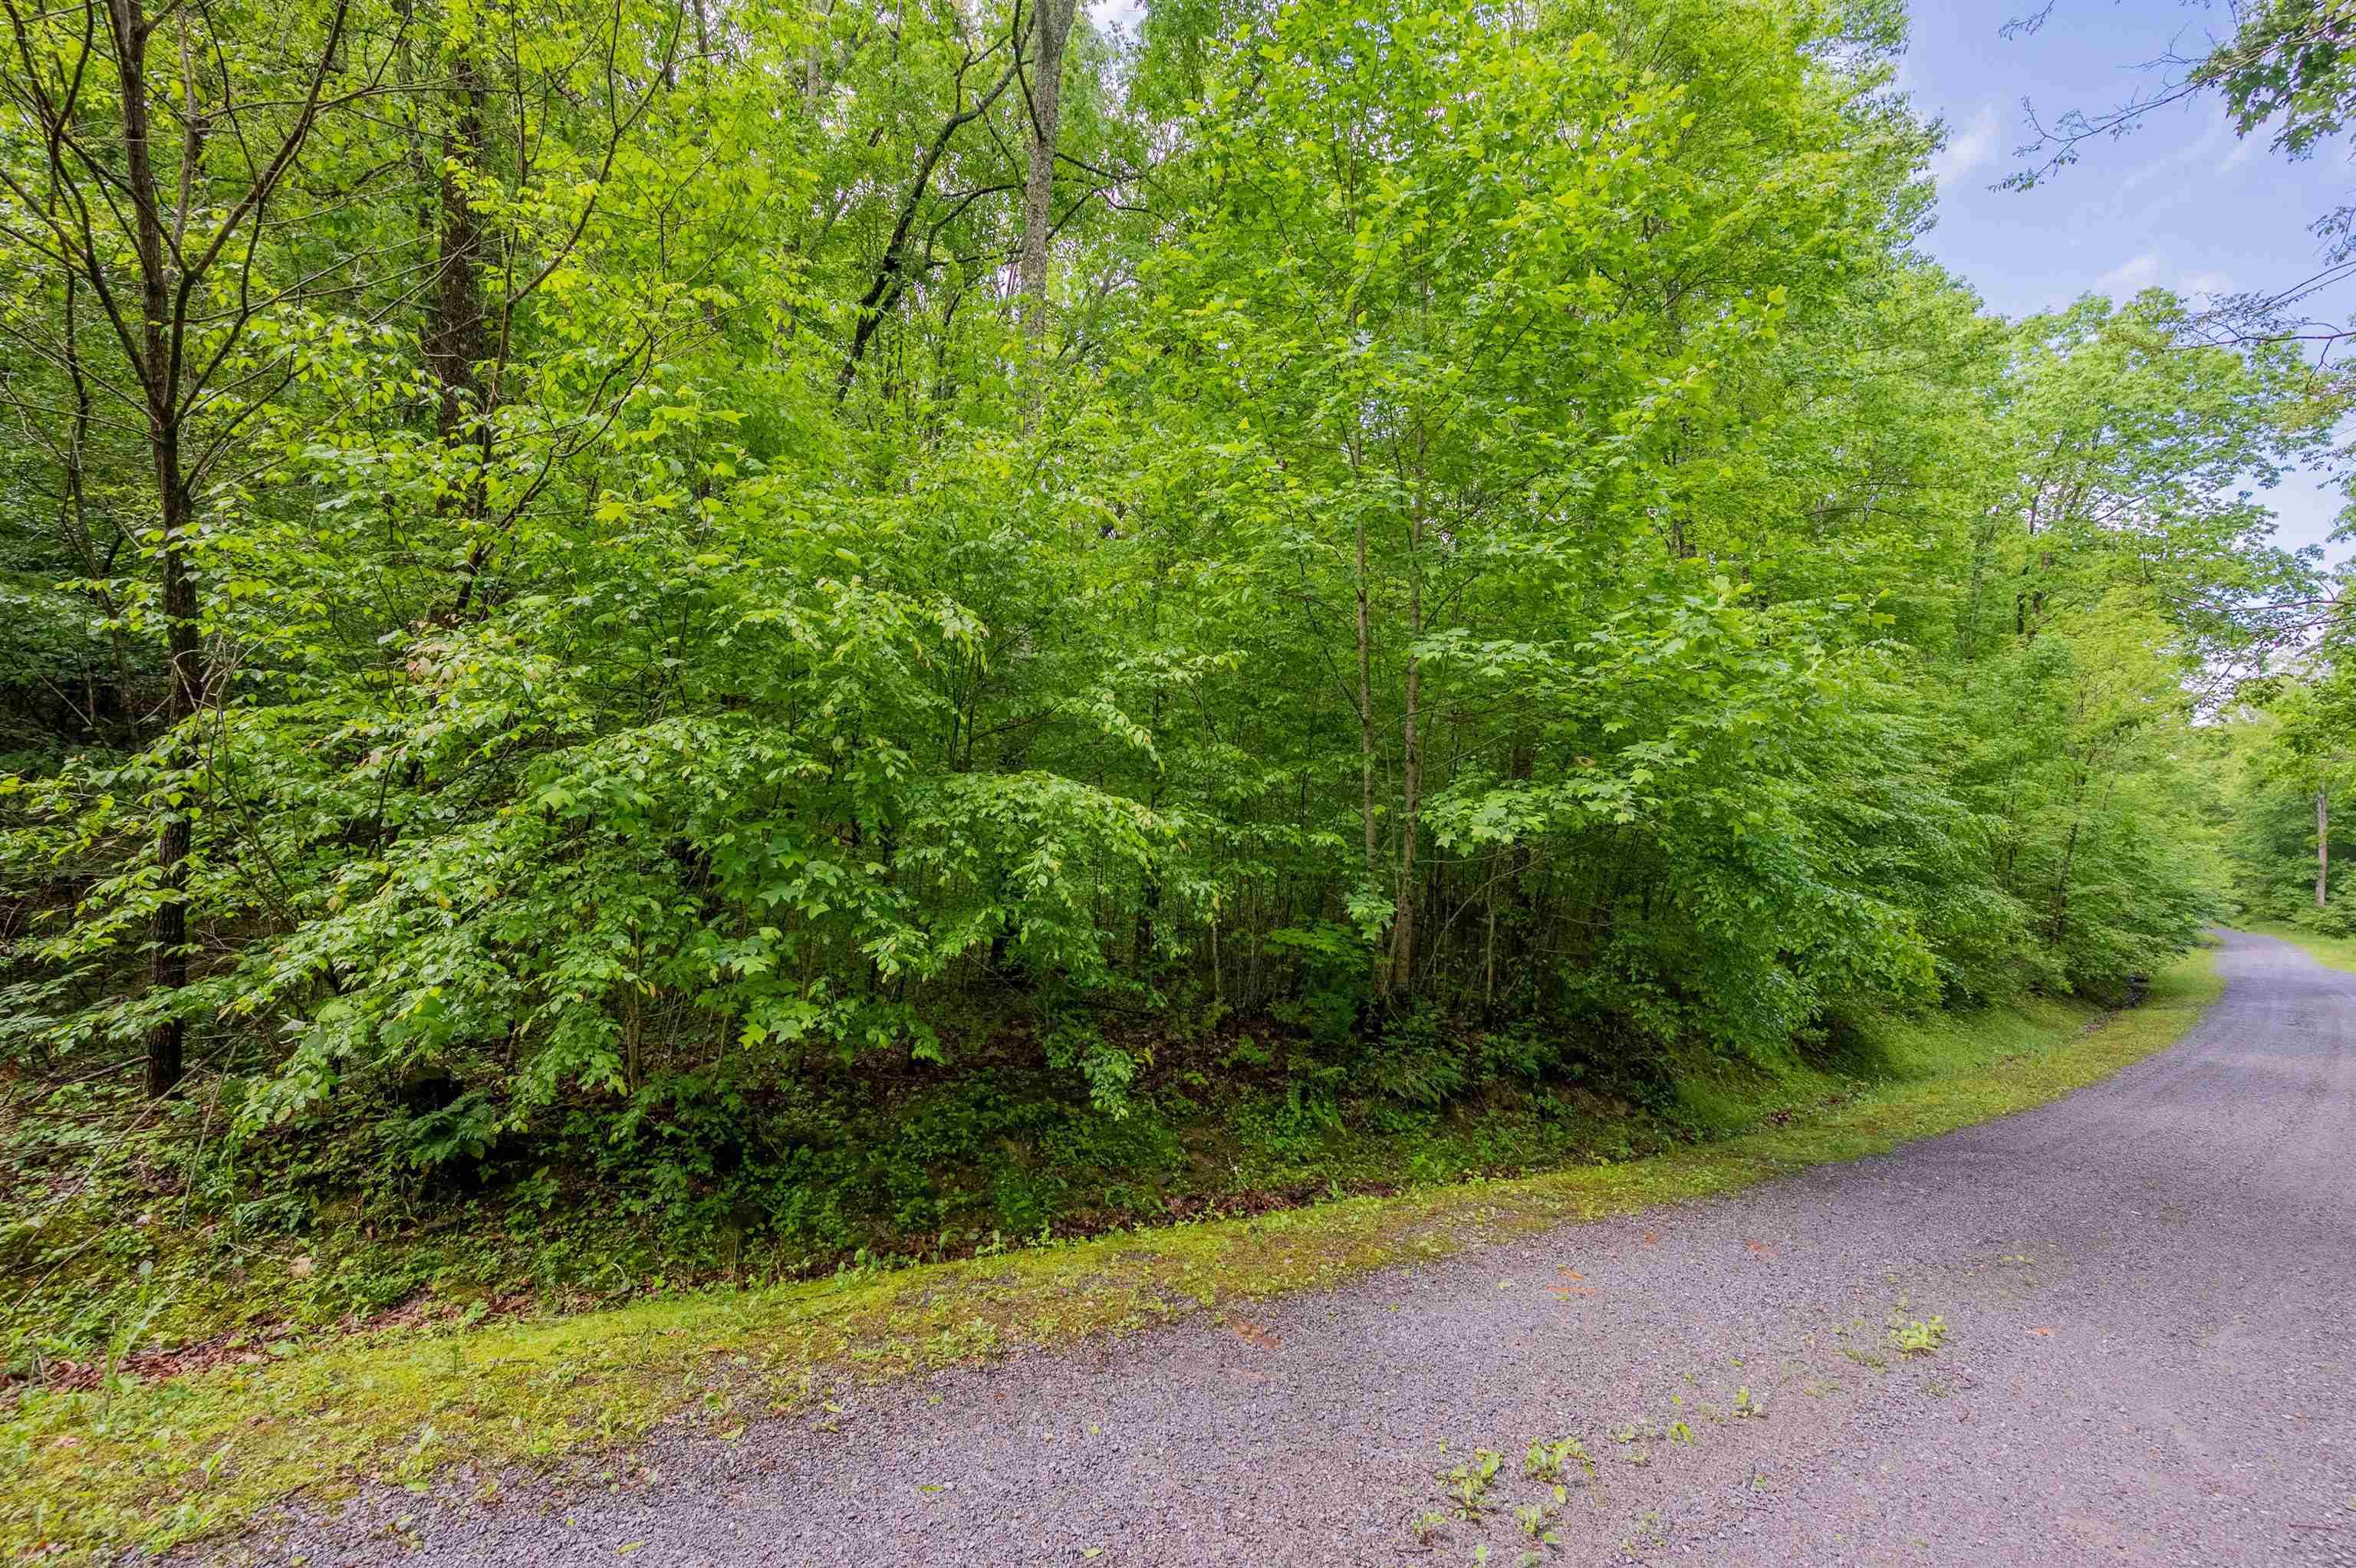 Check out this beautiful parcel of land located in the gated community of Cove Creek in Tazewell County! Nestled in the mountains of Virginia, this tract consists of 7.6 acres, an abundance of wildlife, and endless potential as the future site of your mountain getaway! Whether you're interested in building your forever home or simply a second home to escape the hustle and bustle of everyday life, this property is a blank canvas waiting for someone with a vision to turn it into a something beautiful. However, if you do not wish to be completely cut off from everyday amenities, it is conveniently located approximately 30 minutes from the towns of Tazewell, VA, Bluefield, WV and is a short distance from the famous "Back of the Dragon!" Don't miss your chance at purchasing this rare gem. Schedule your showing today!